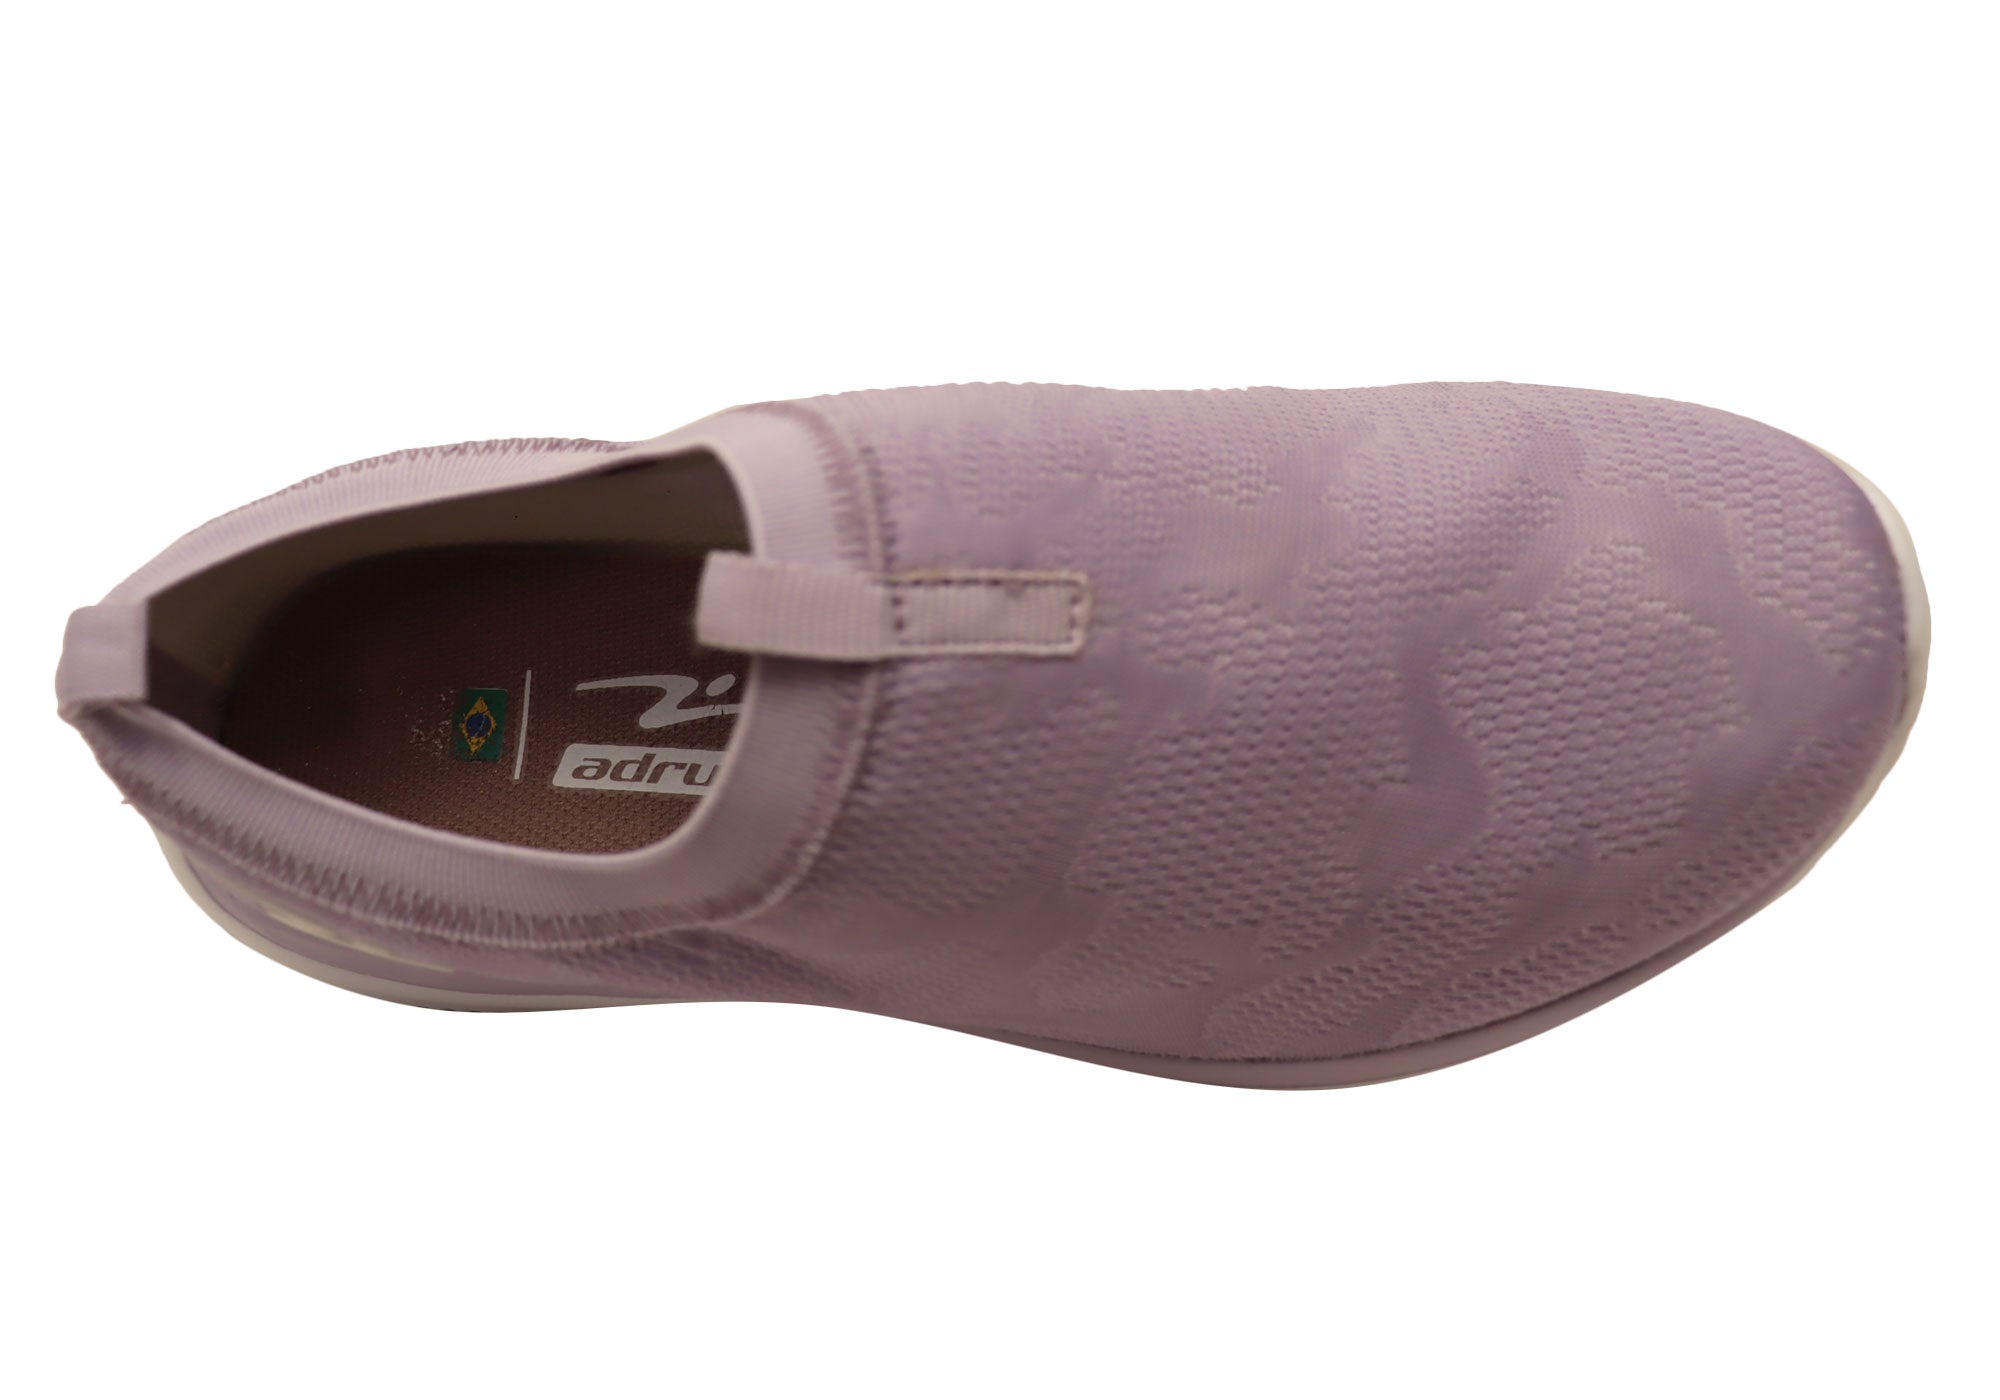 Adrun Vezar Womens Comfortable Slip On Shoes Made In Brazil